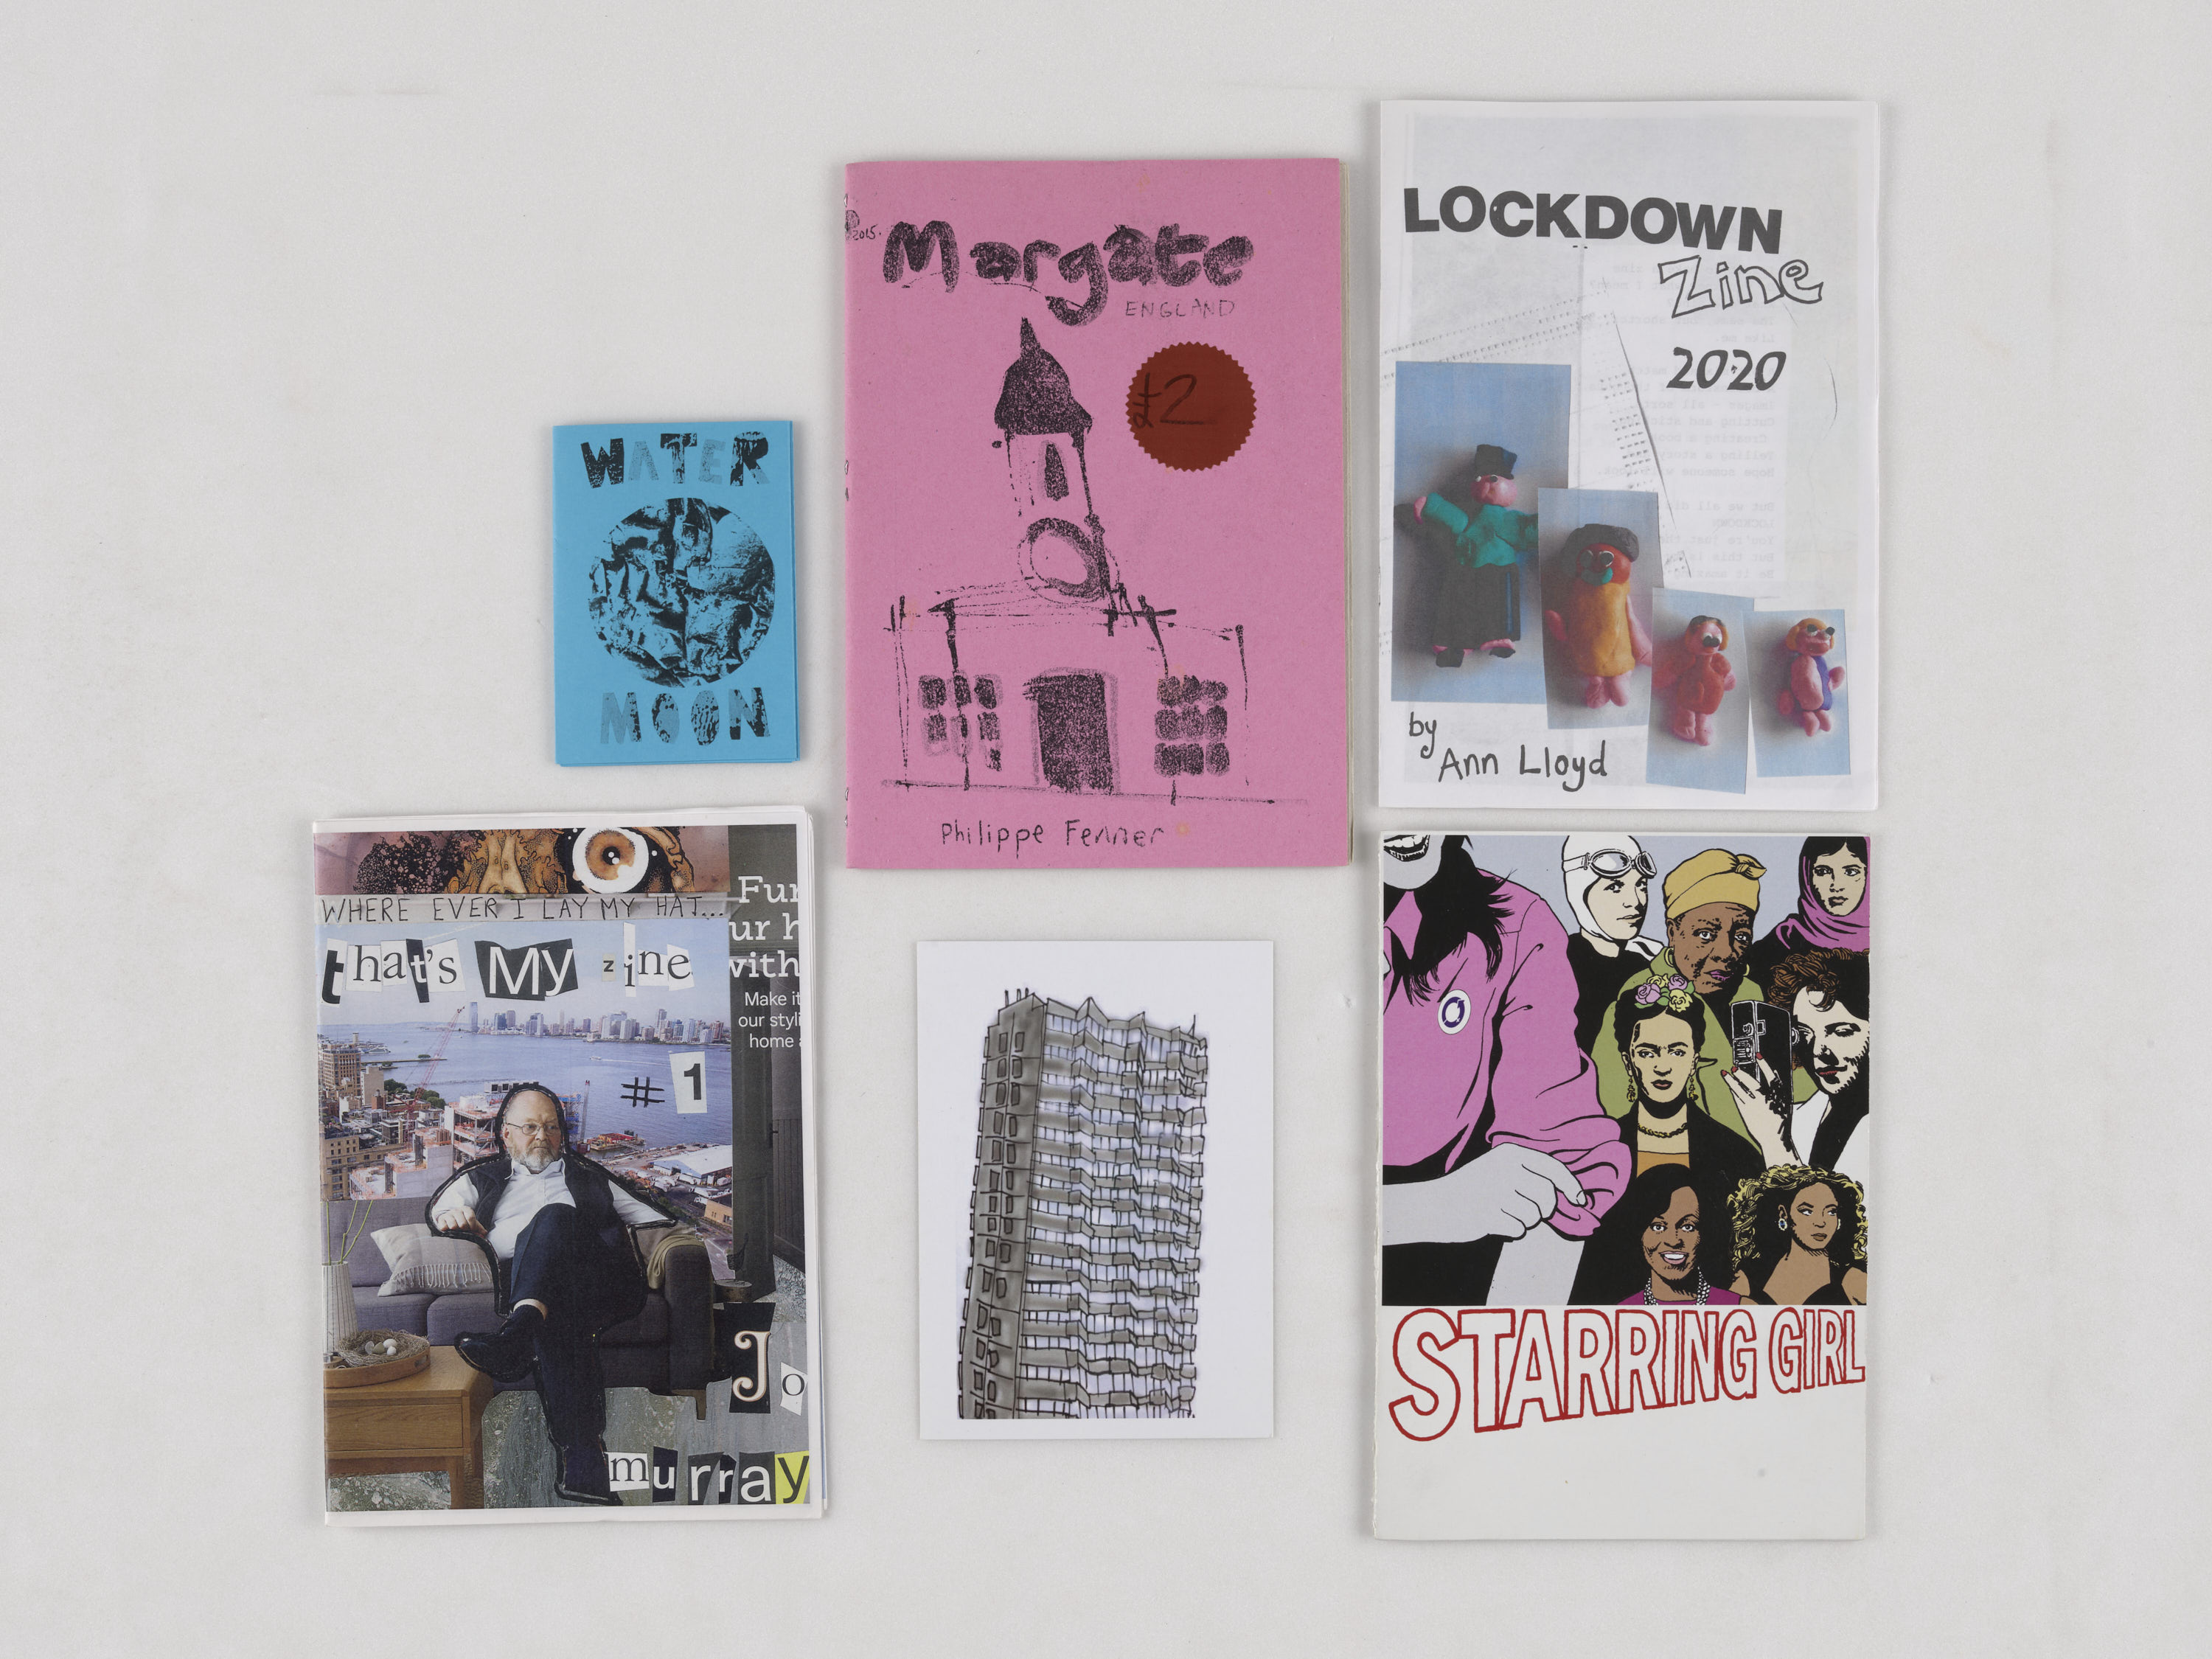 A photograph of 6 items from the collection, their covers facing the viewer.